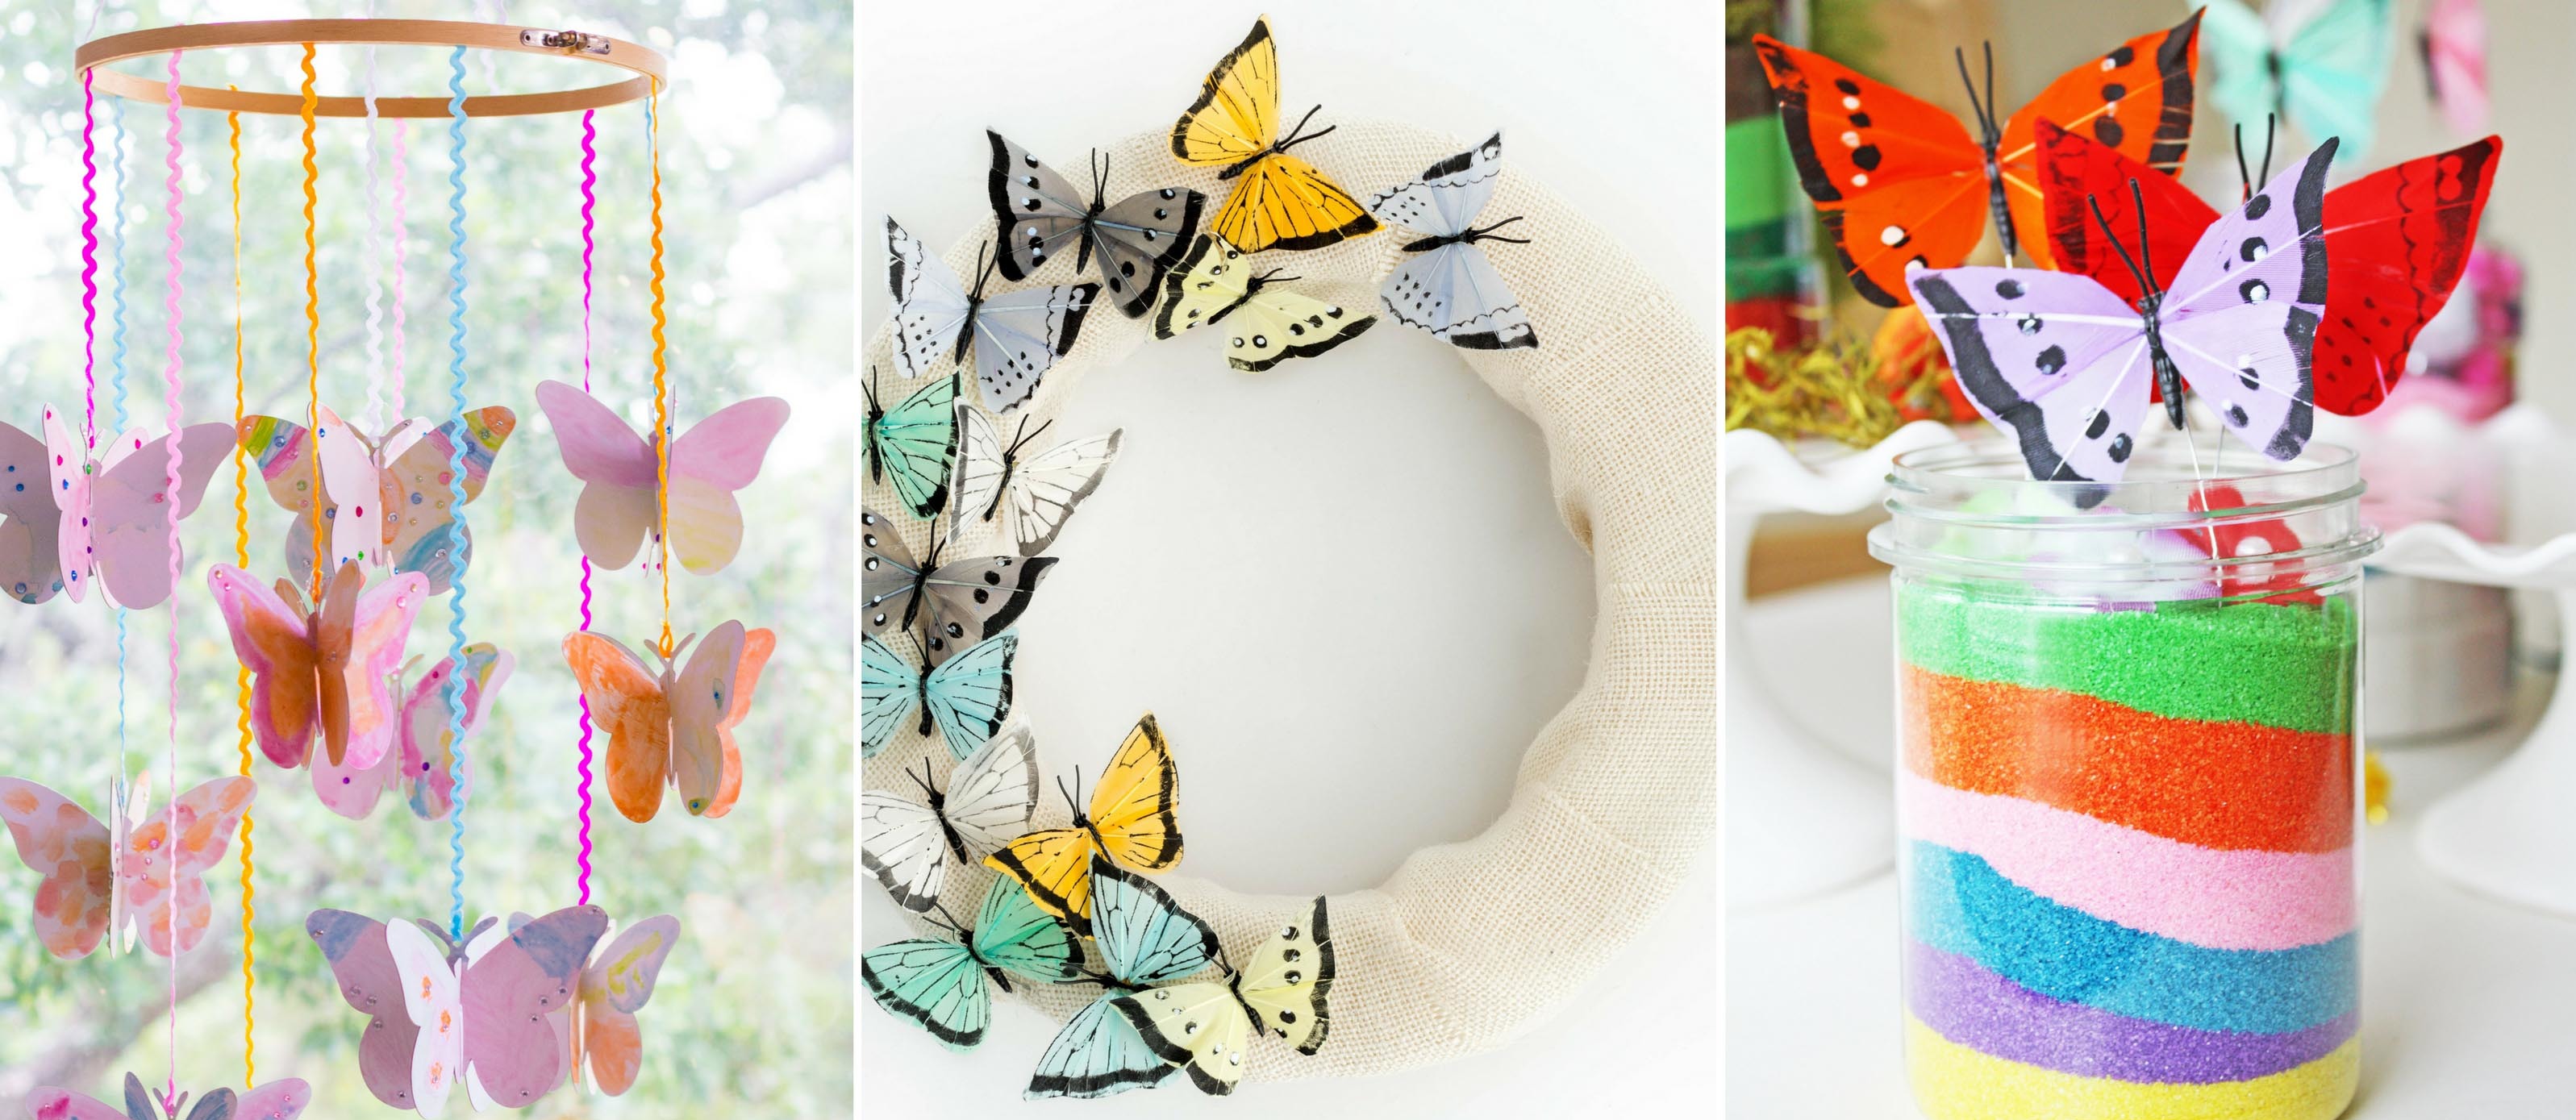 Butterfly Bead Pet - Craft Project Ideas